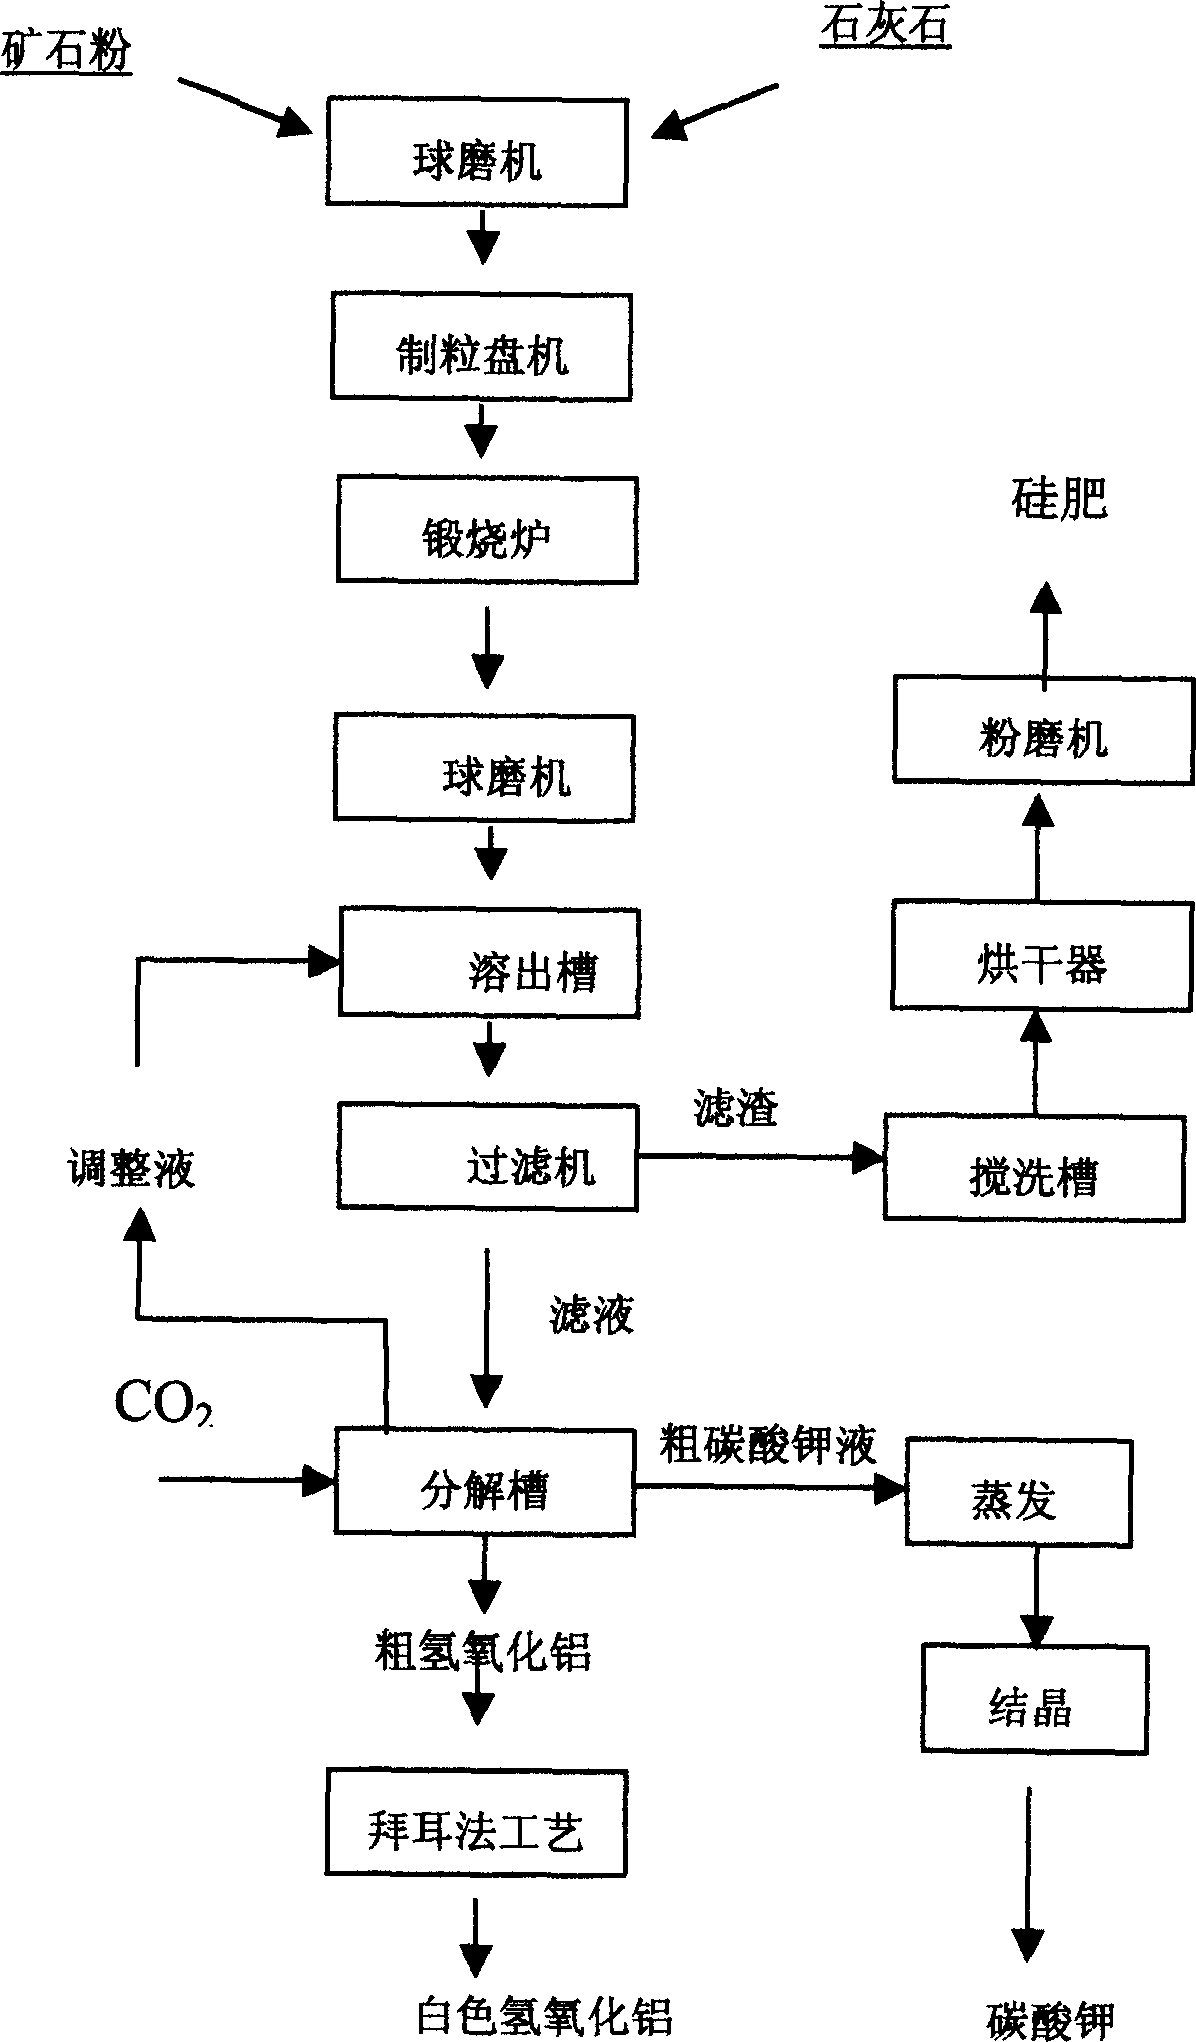 Formula and technique for extracting potassium carbonate and aluminum hydroxide and preparing siliceous fertilizer using slate with rich kalium